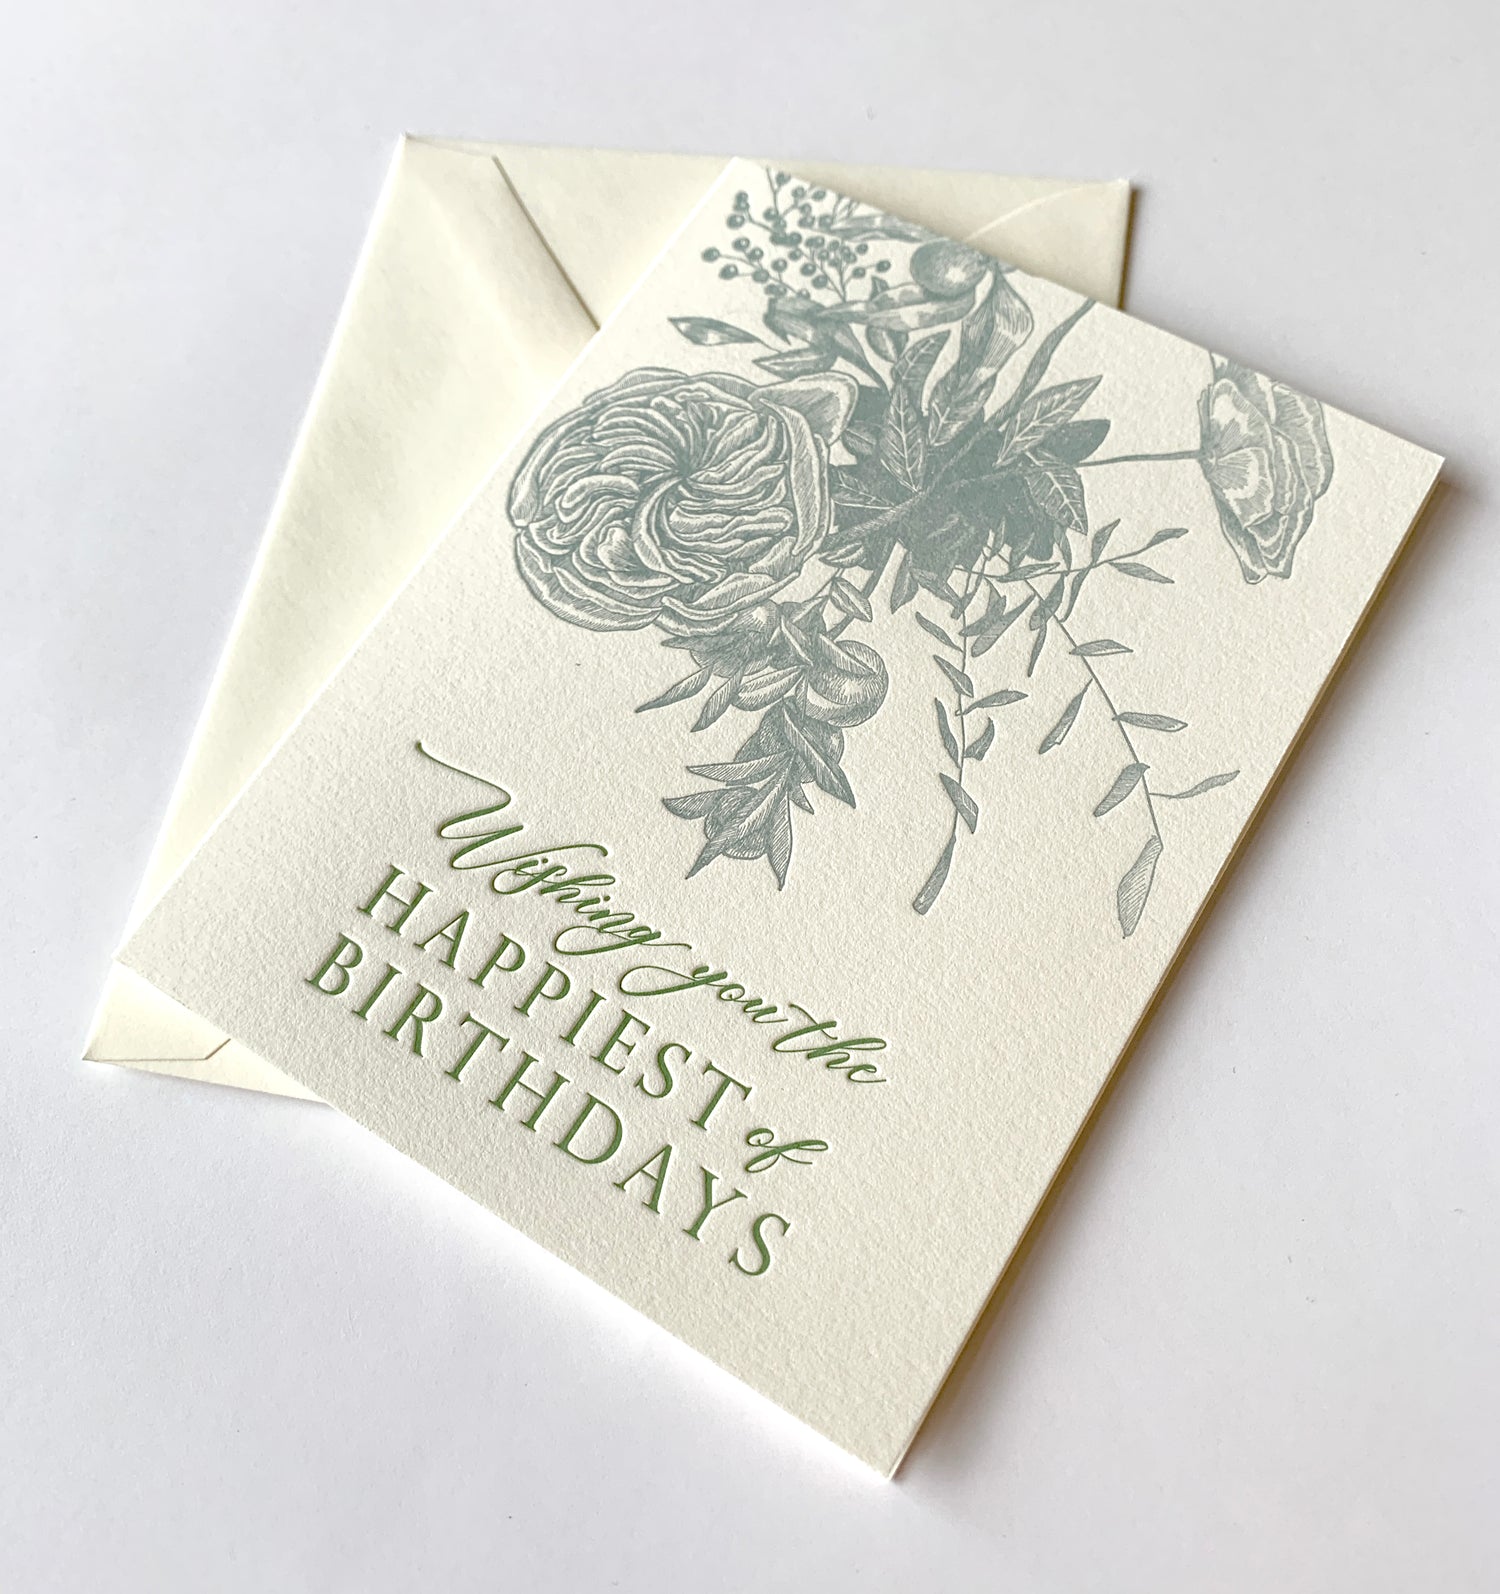 Letterpress birthday card with florals that says "Wishing you the happiest of birthdays" by Rust Belt Love